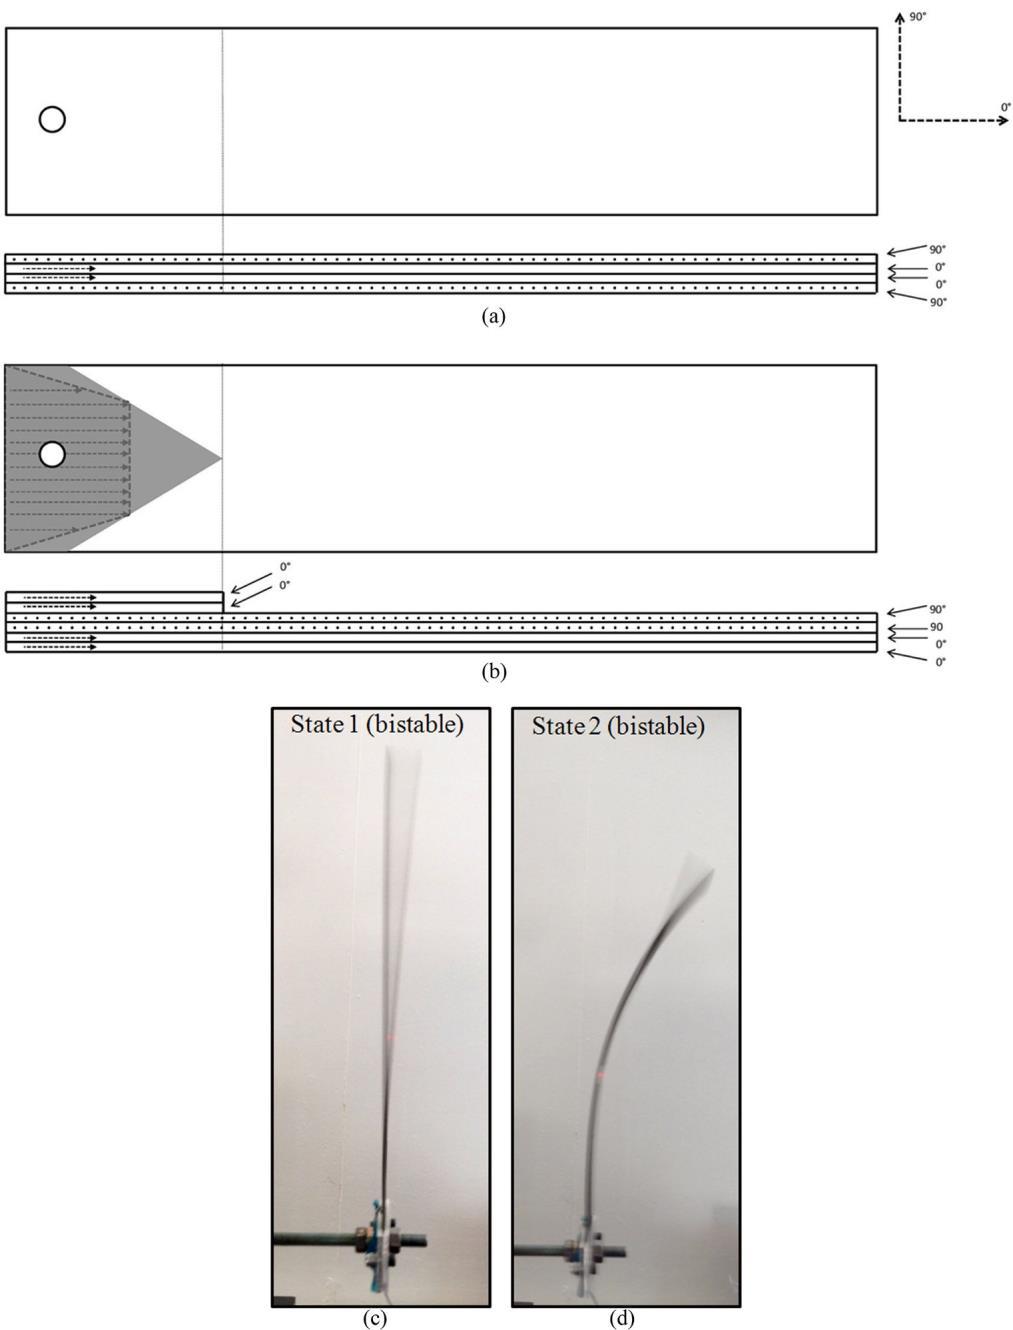 Manufacture and Characterisation of Piezoelectric Broadband Energy Harvesters 115 Figure 2. Laminate lay-ups: (a) linear and symmetric [90/0/0/90] T; and (b) bistable and asymmetric [0/0/90/90] T.